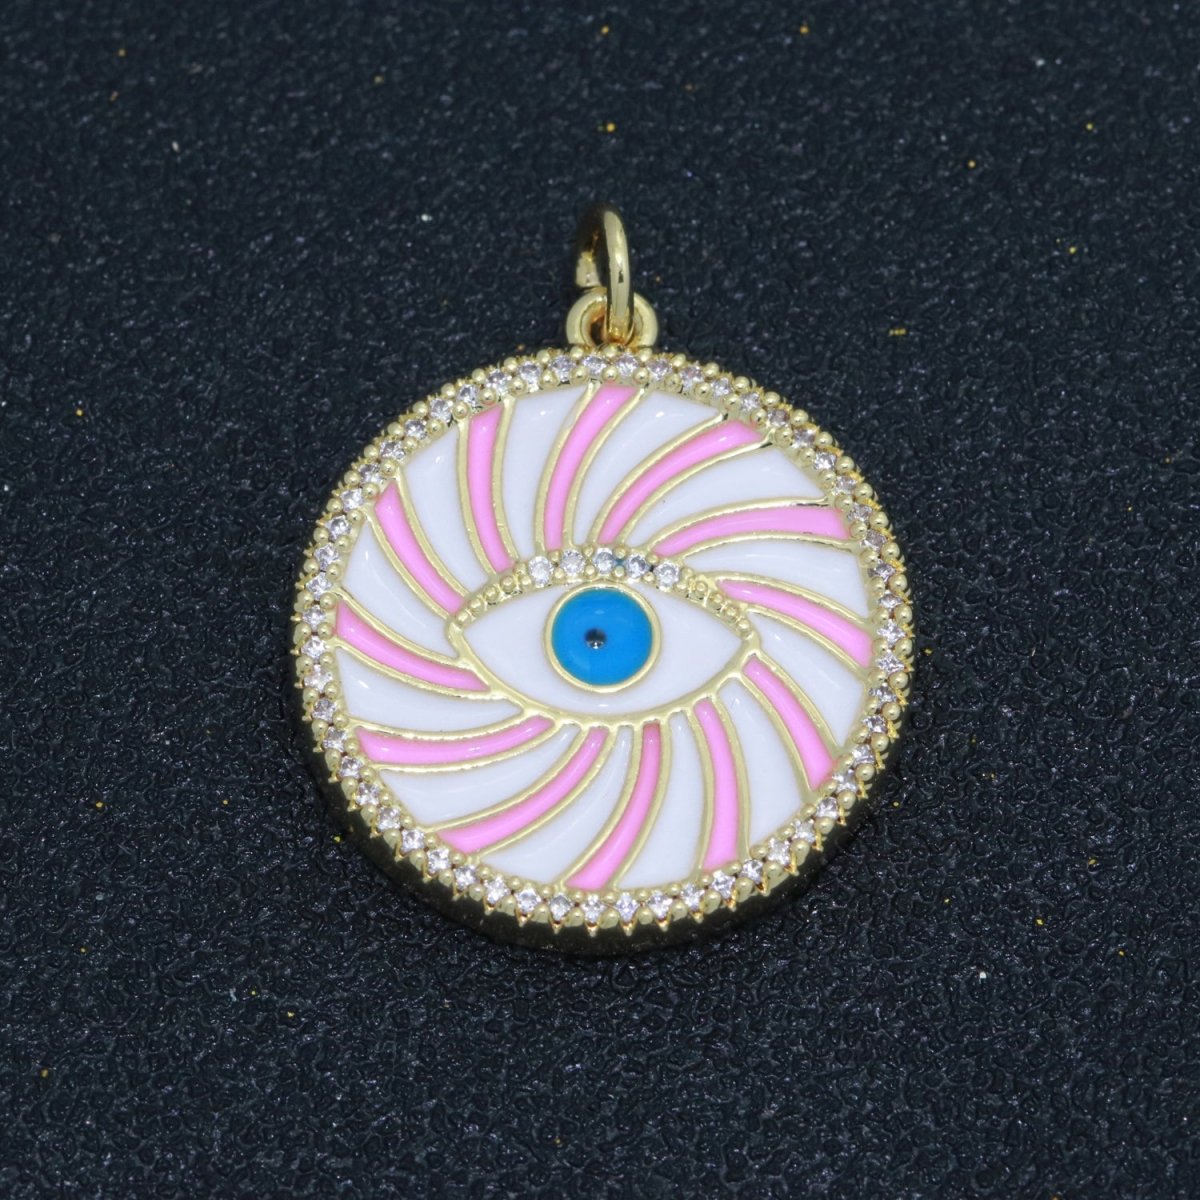 Evil Eye Gold Medallion Colorful Enamel Swirl Coin Charm Pink, Green, Red, Teal, White Color M-721 - M-730 - DLUXCA